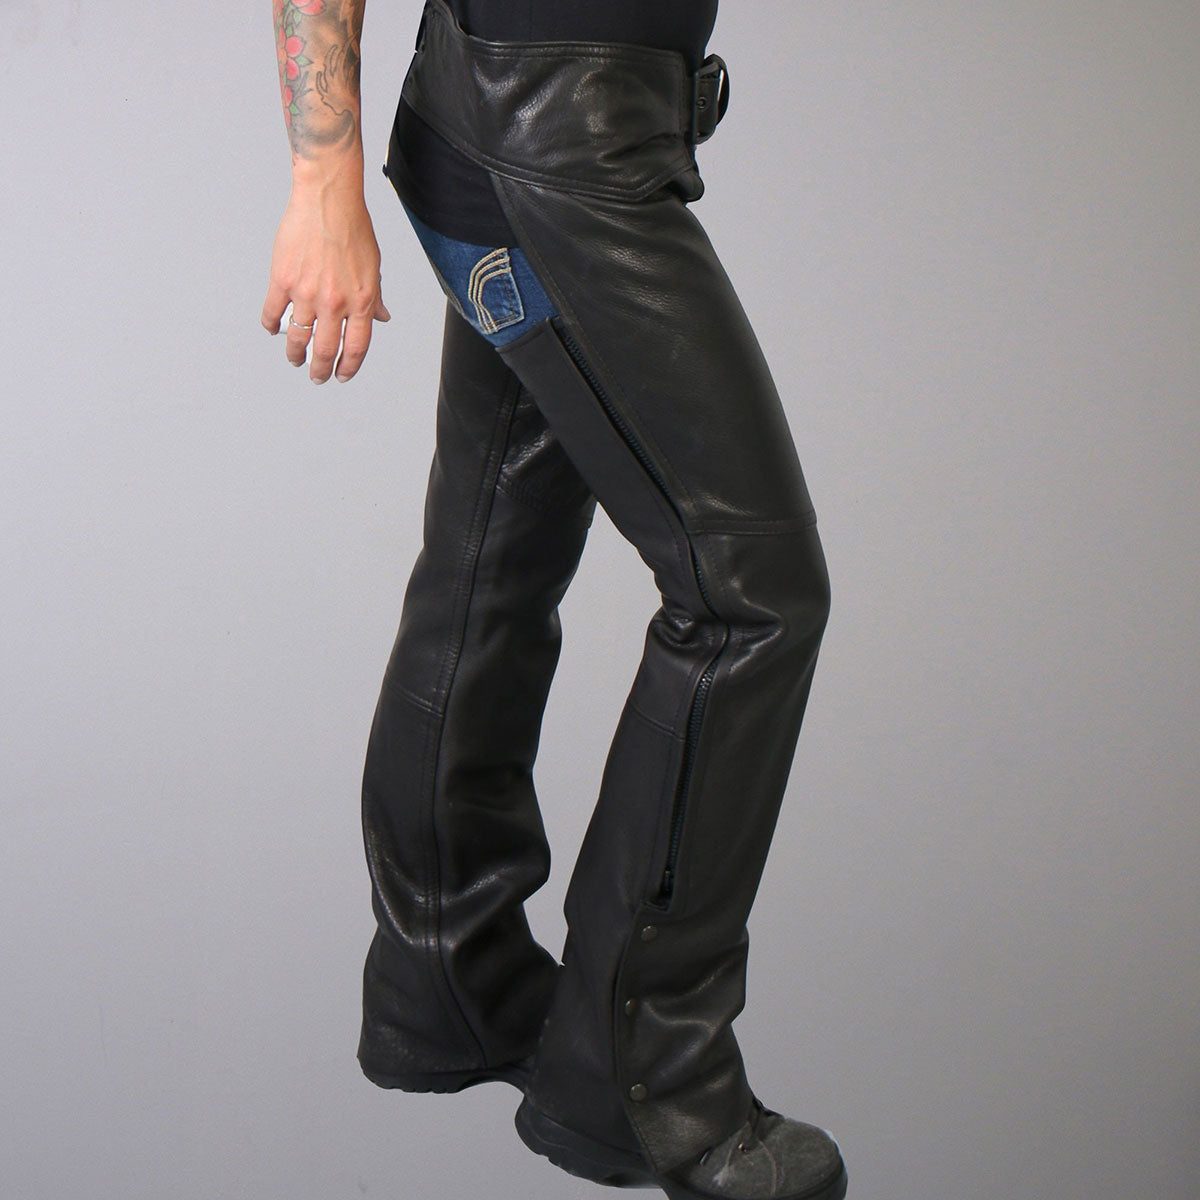 Hot Leathers CHL5001 USA Made Women's Black Premium Leather Motorcycle Chaps